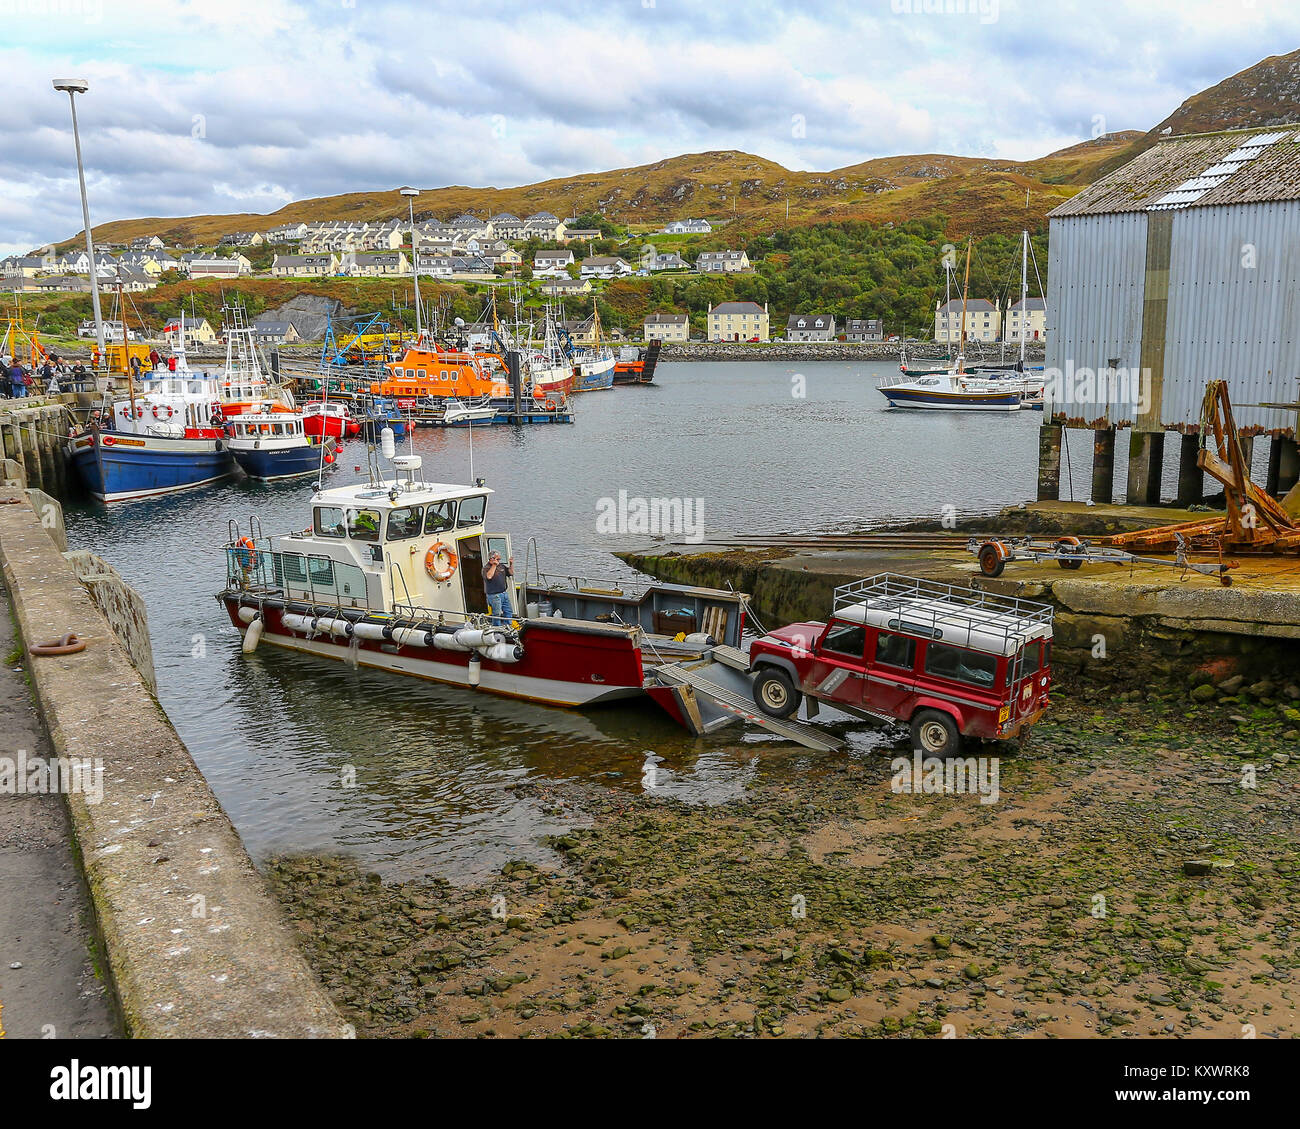 Loading a Land Rover onto a boat in the harbour at Mallaig, Lochaber, on the west coast of the Highlands of Scotland, UK Stock Photo